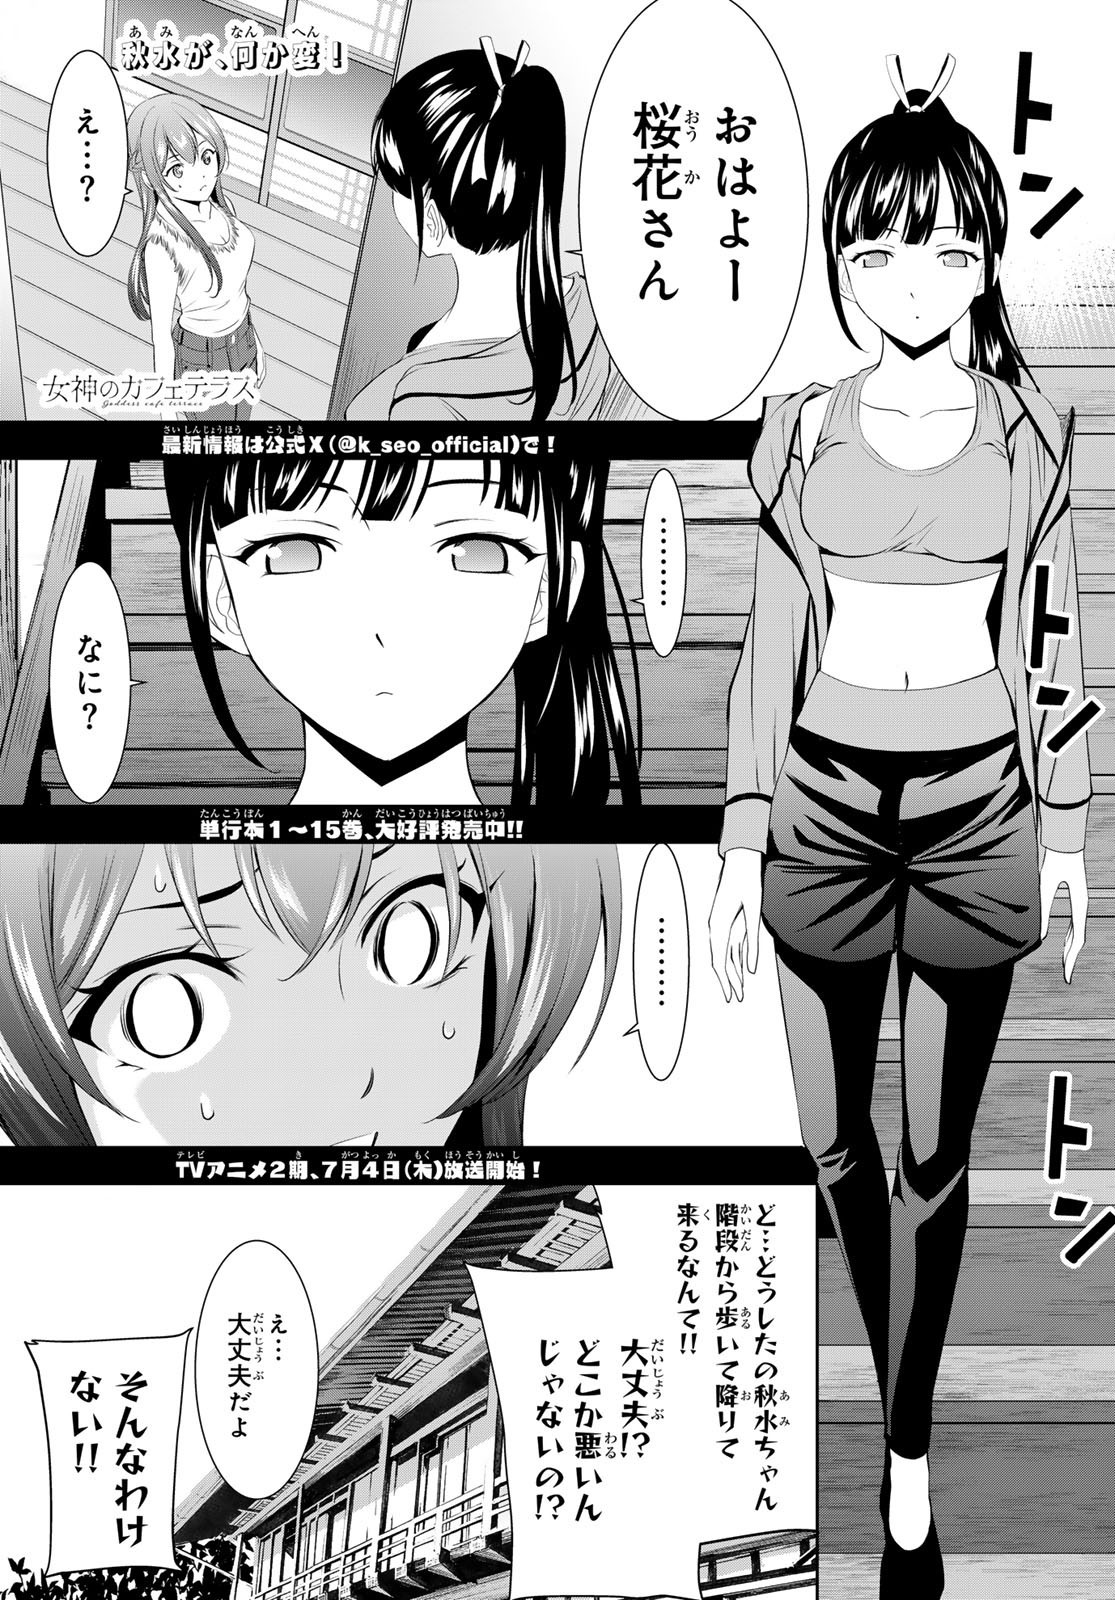 Goddess-Cafe-Terrace - Chapter 152 - Page 1